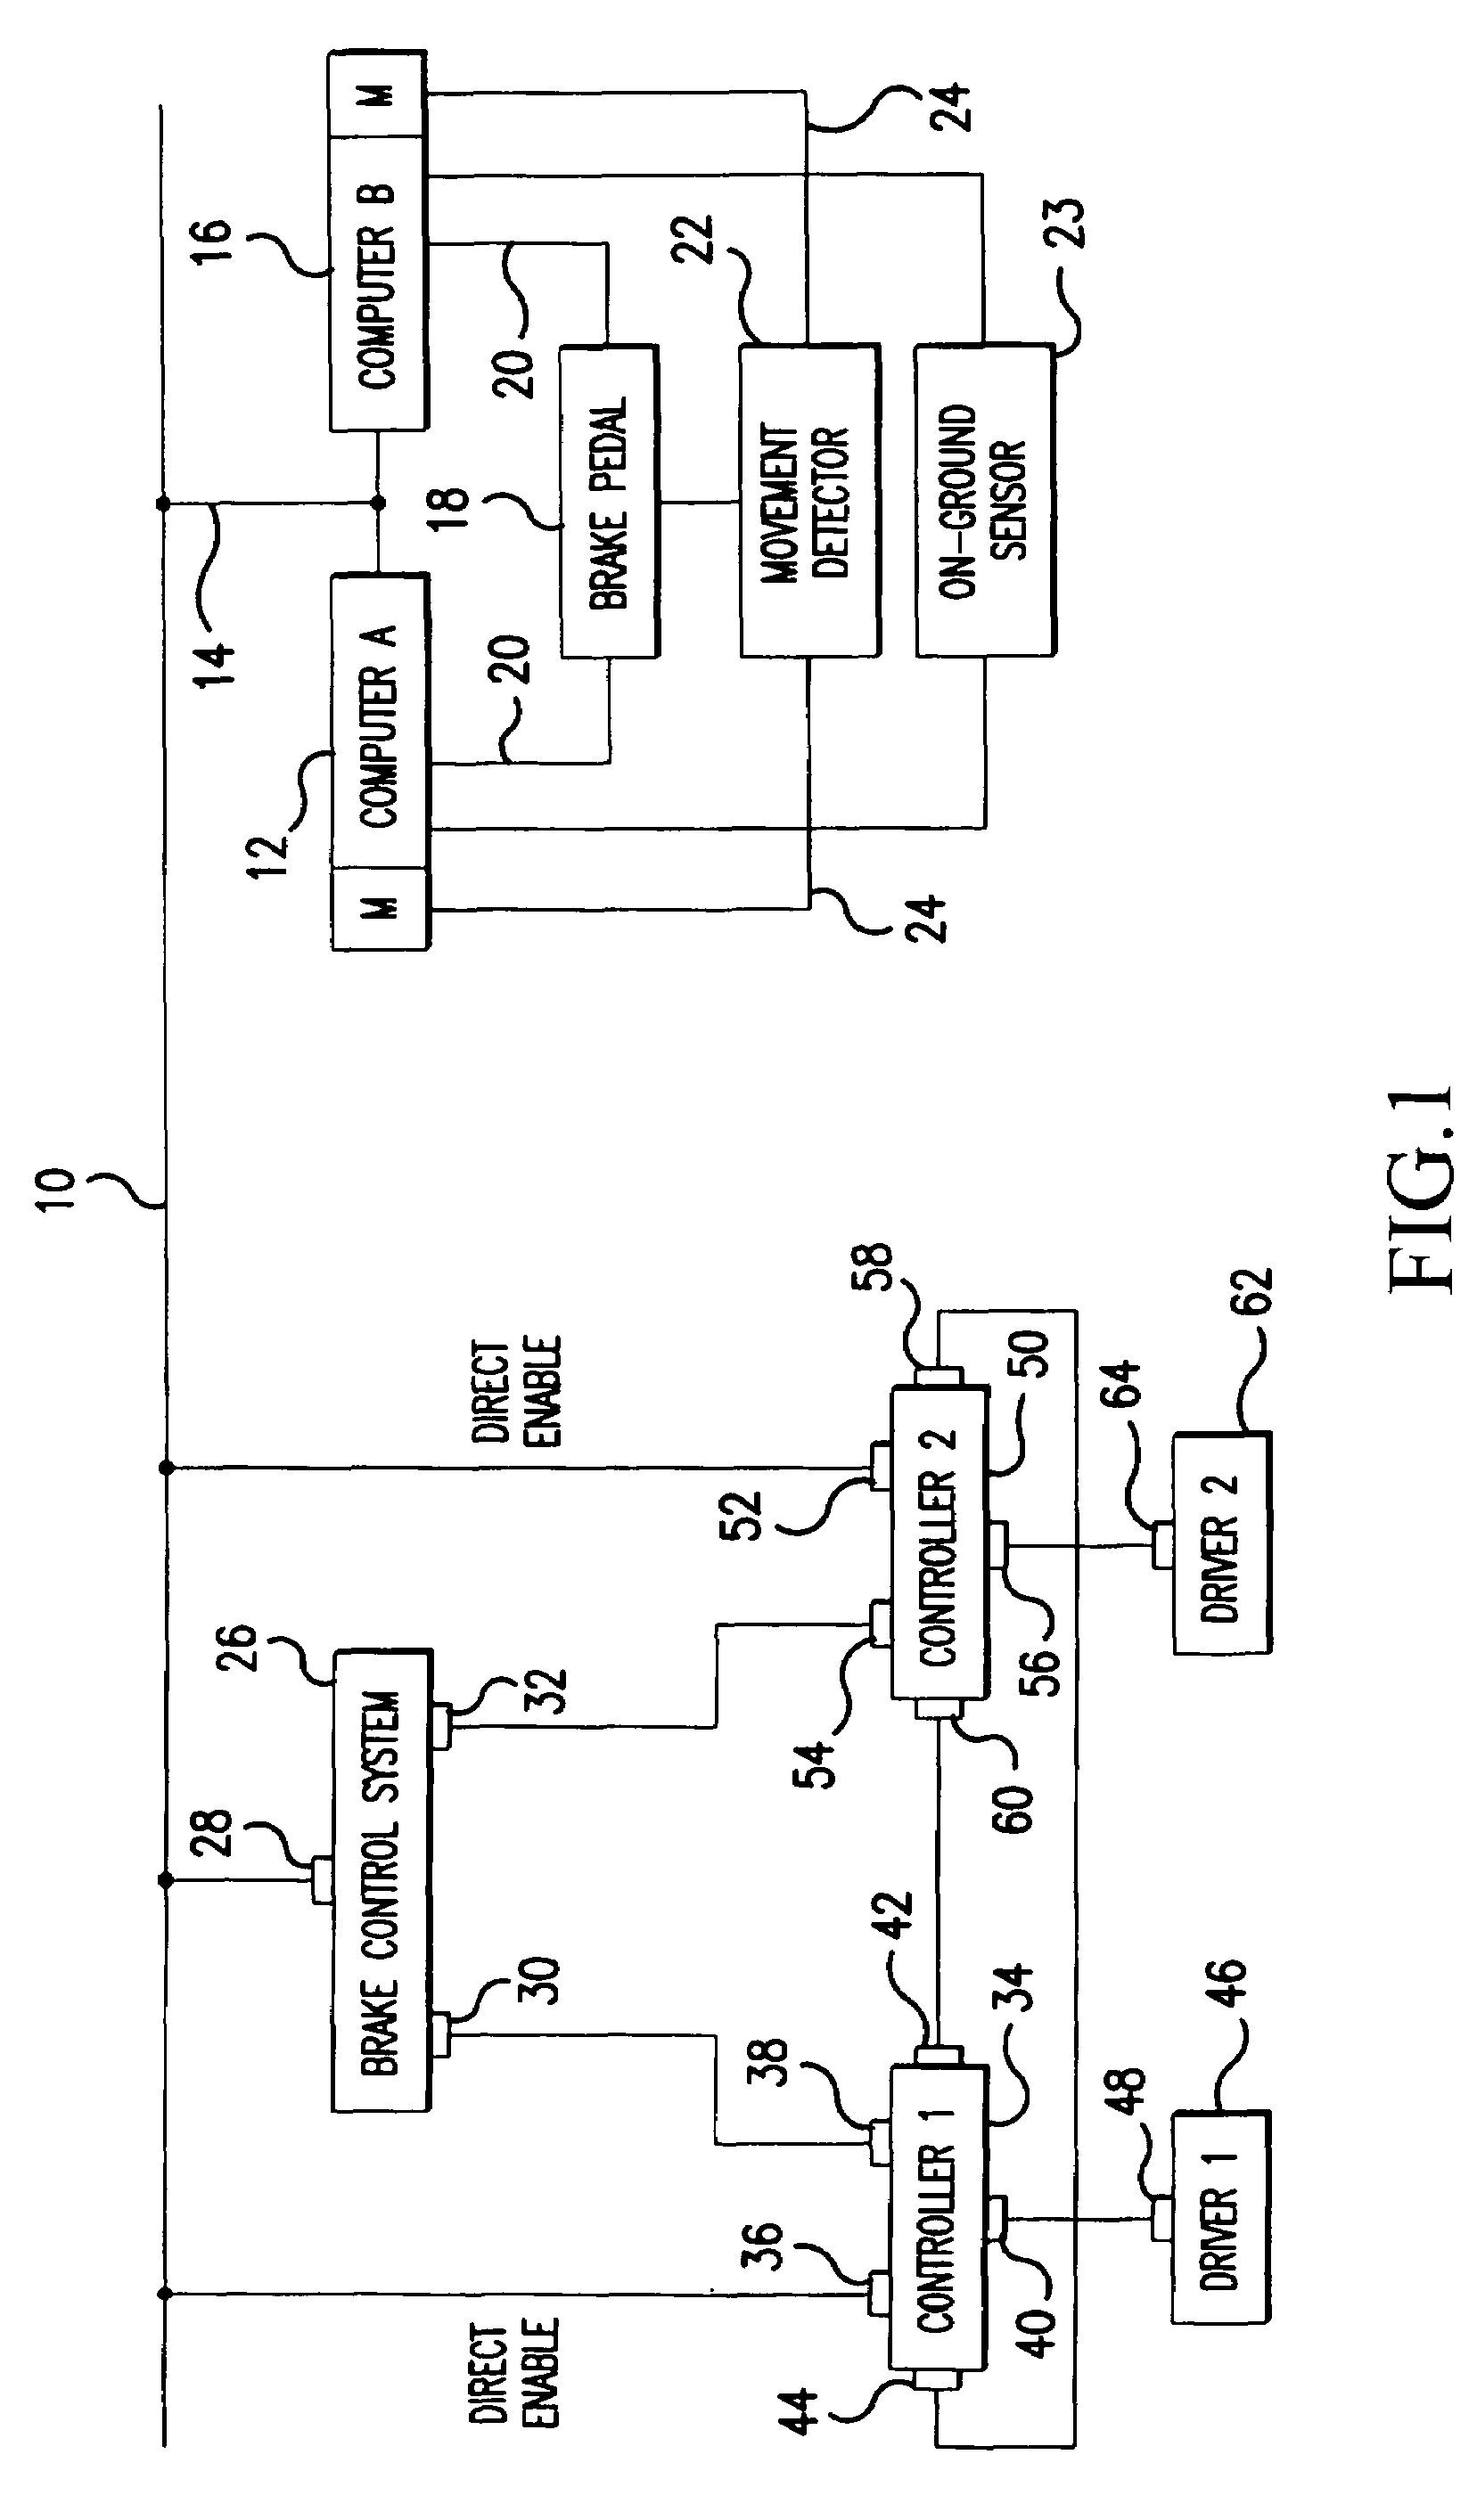 Brake system providing at least one enable signal to brake controllers and method of using same